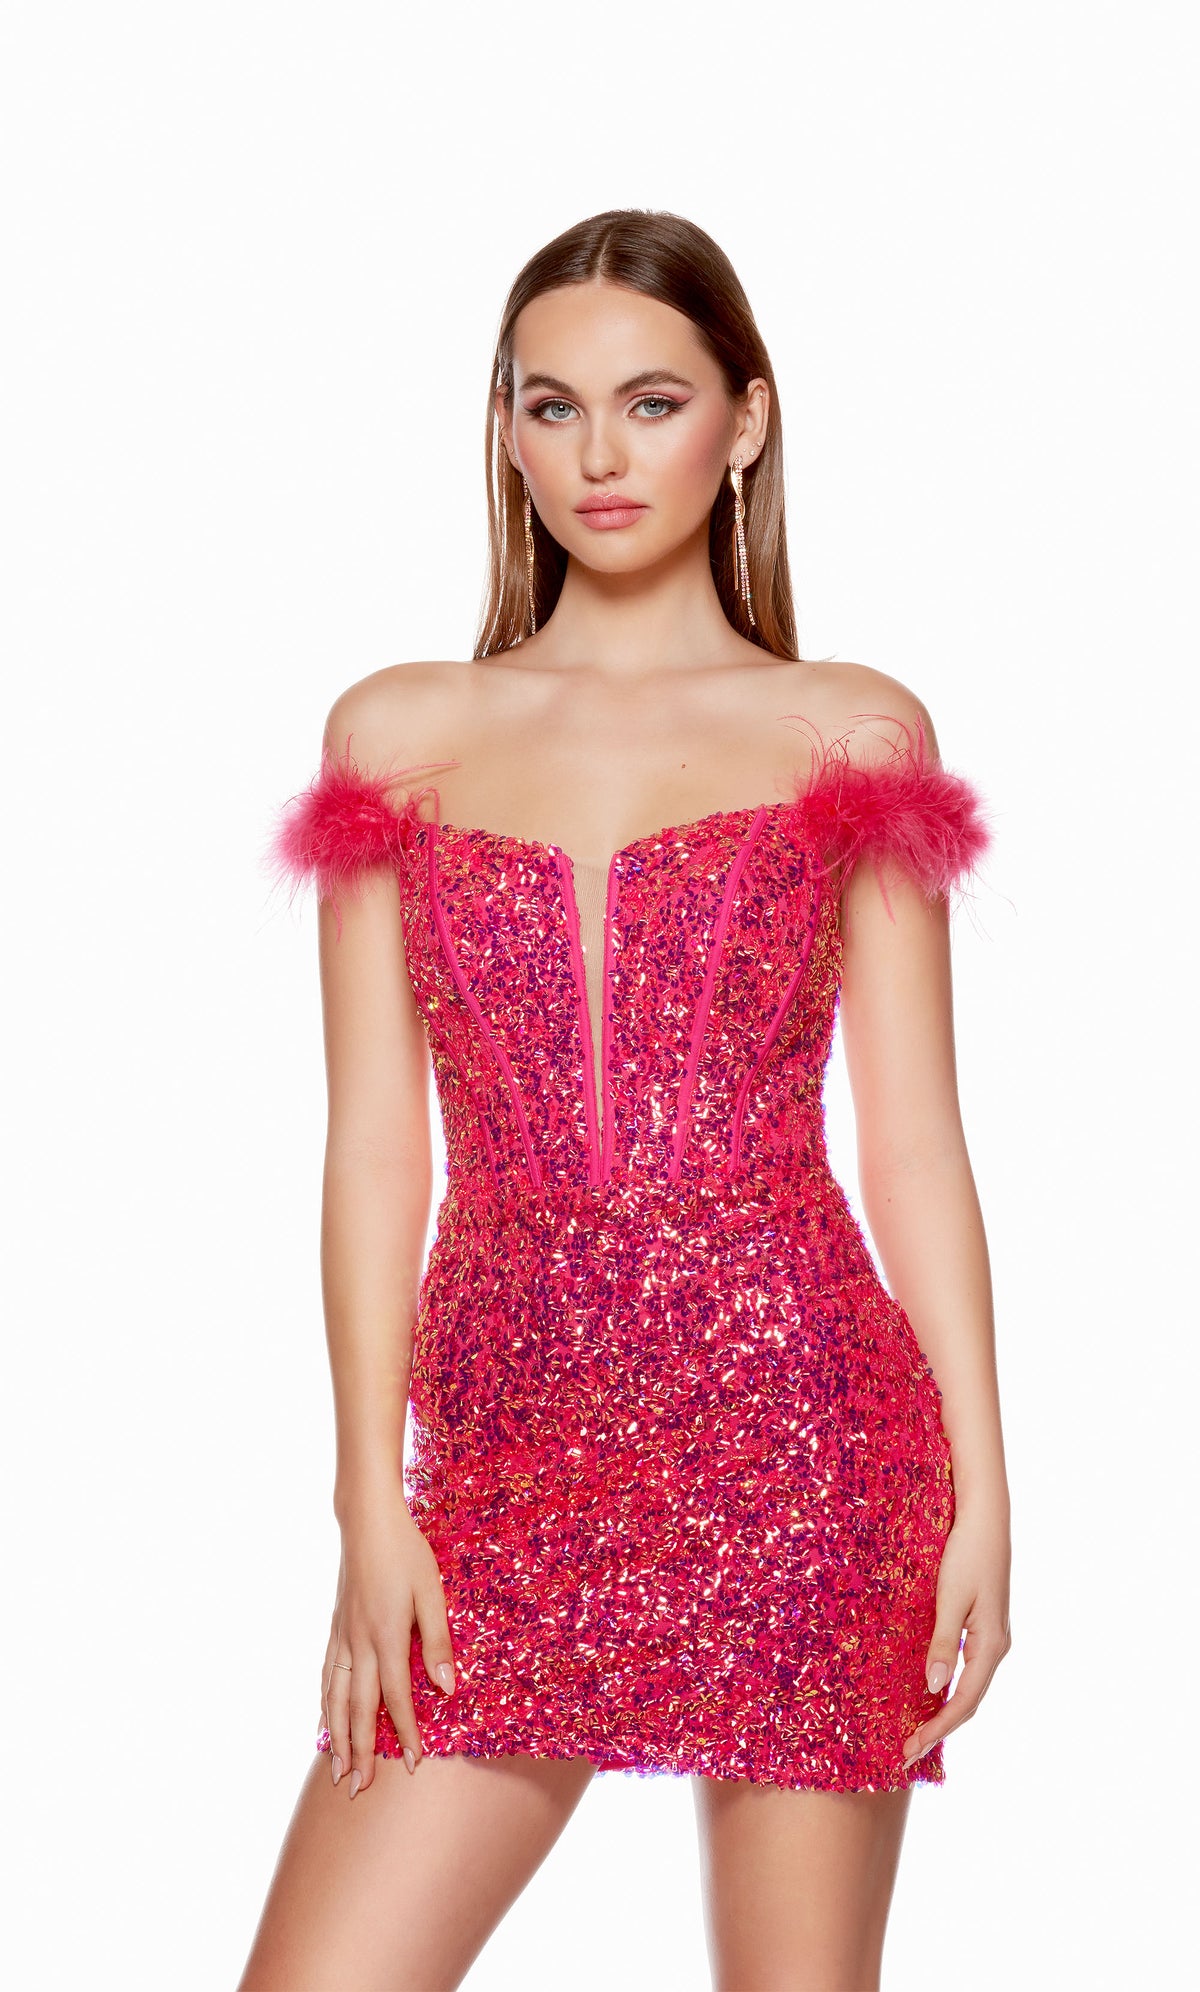 An off-the-shoulder short prom dress with feather-trimmed sleeves, crafted from a sparkly iridescent hot pink seqins fabric.